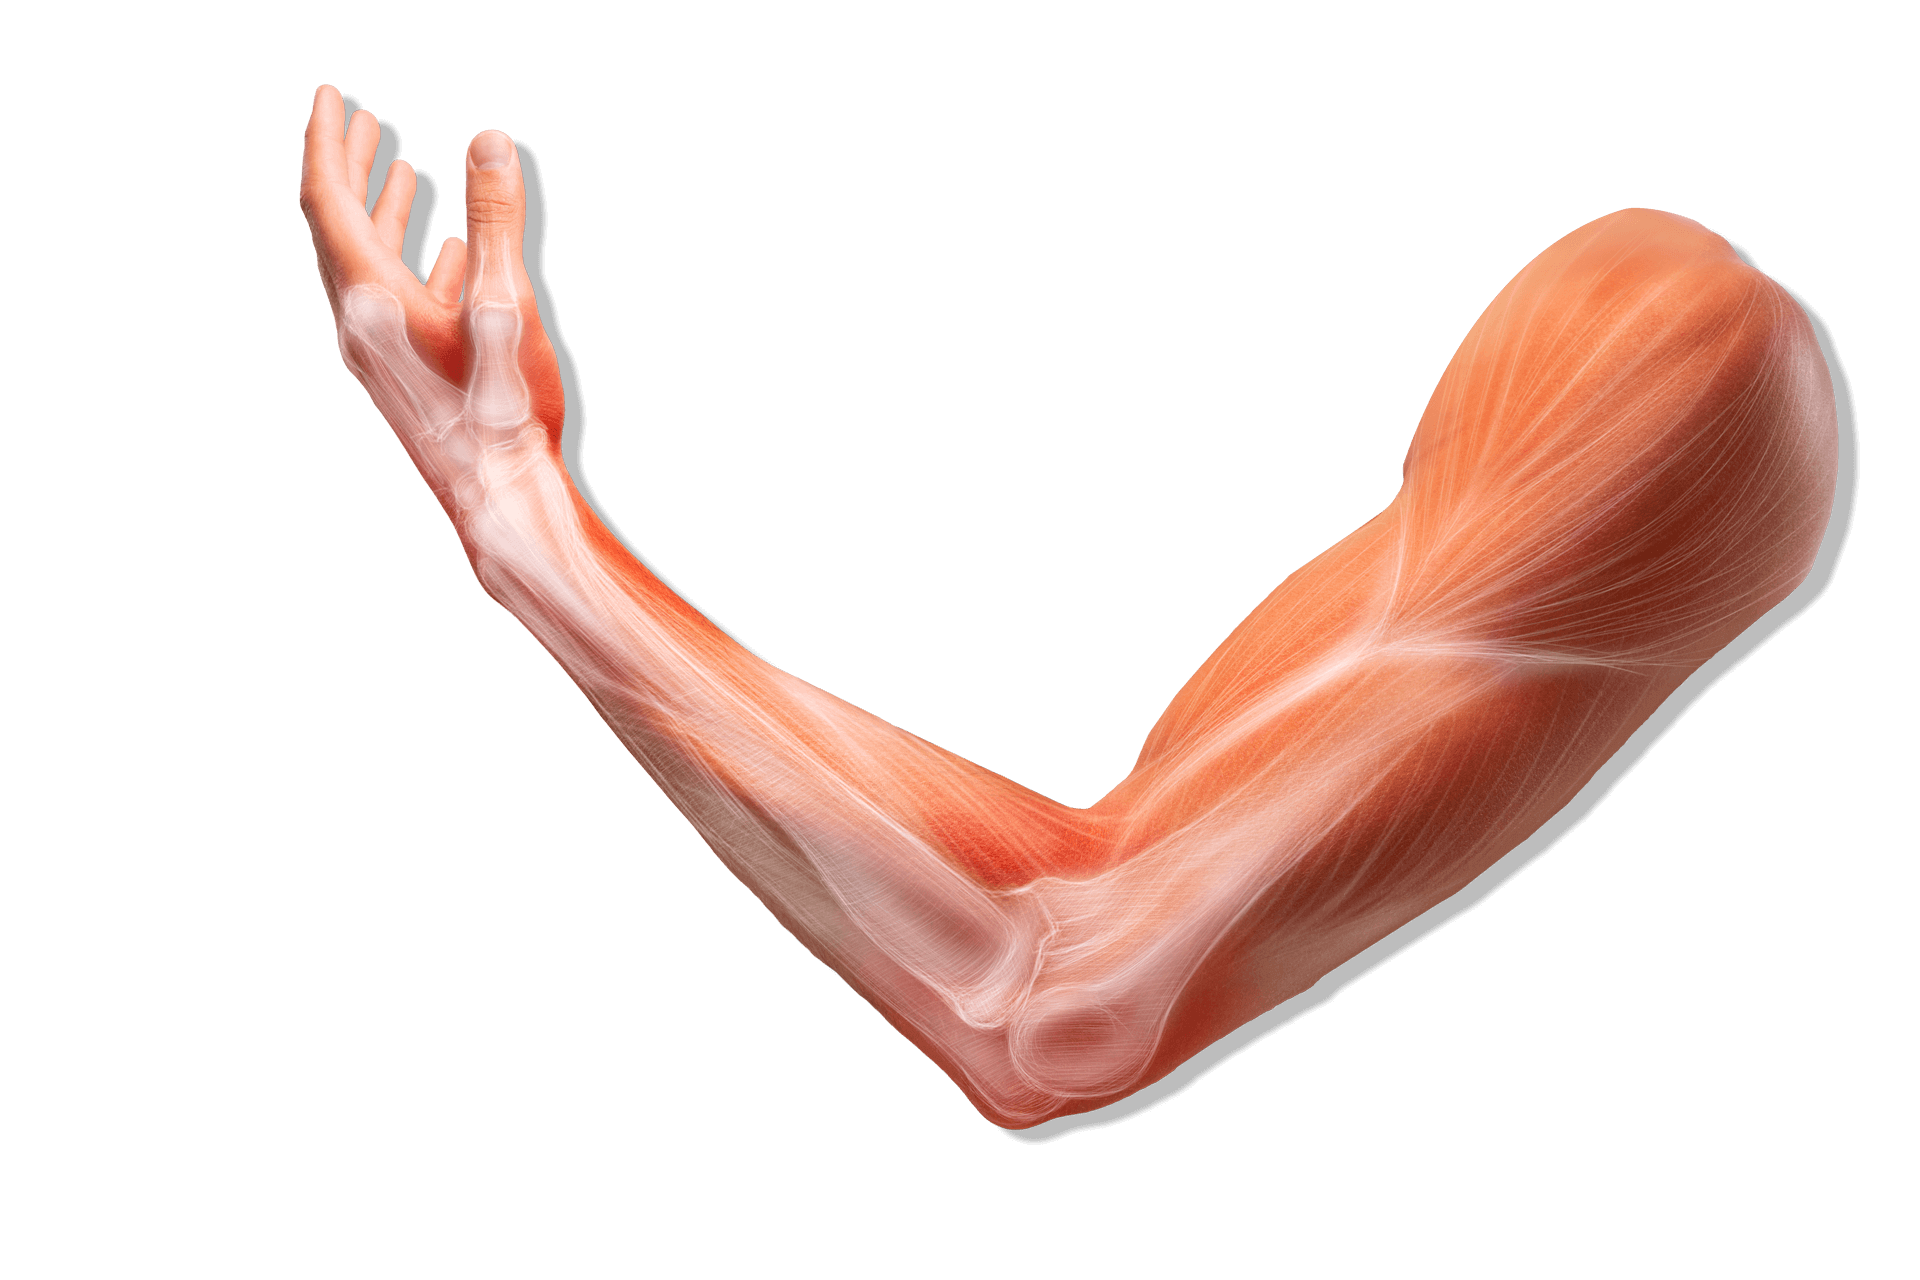 Shoulder, elbow, wrist, hand physiotherapy | Action Rehab Hand Therapy Clinic - Shoulder, Elbow, Wrist and Hand Physiotherapists